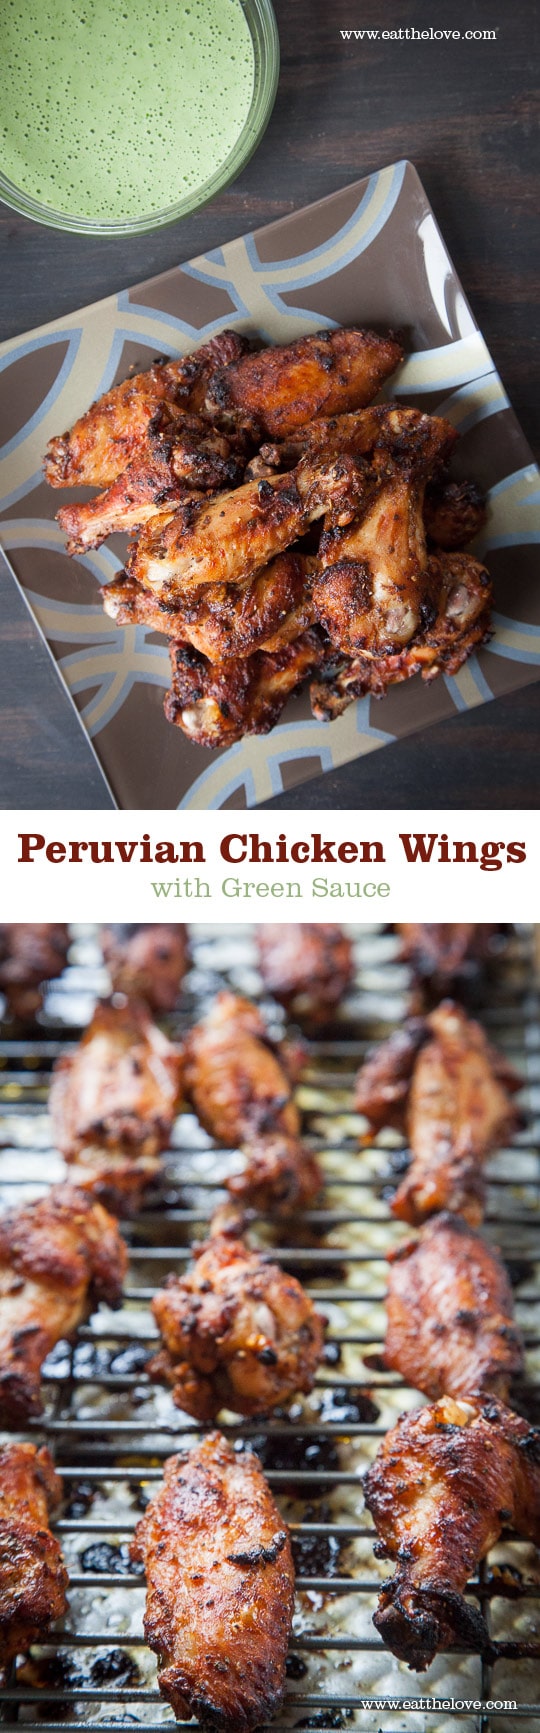 Peruvian Chicken Wings with Peruvian Green Sauce. Photo and recipe by Irvin Lin of Eat the Love.